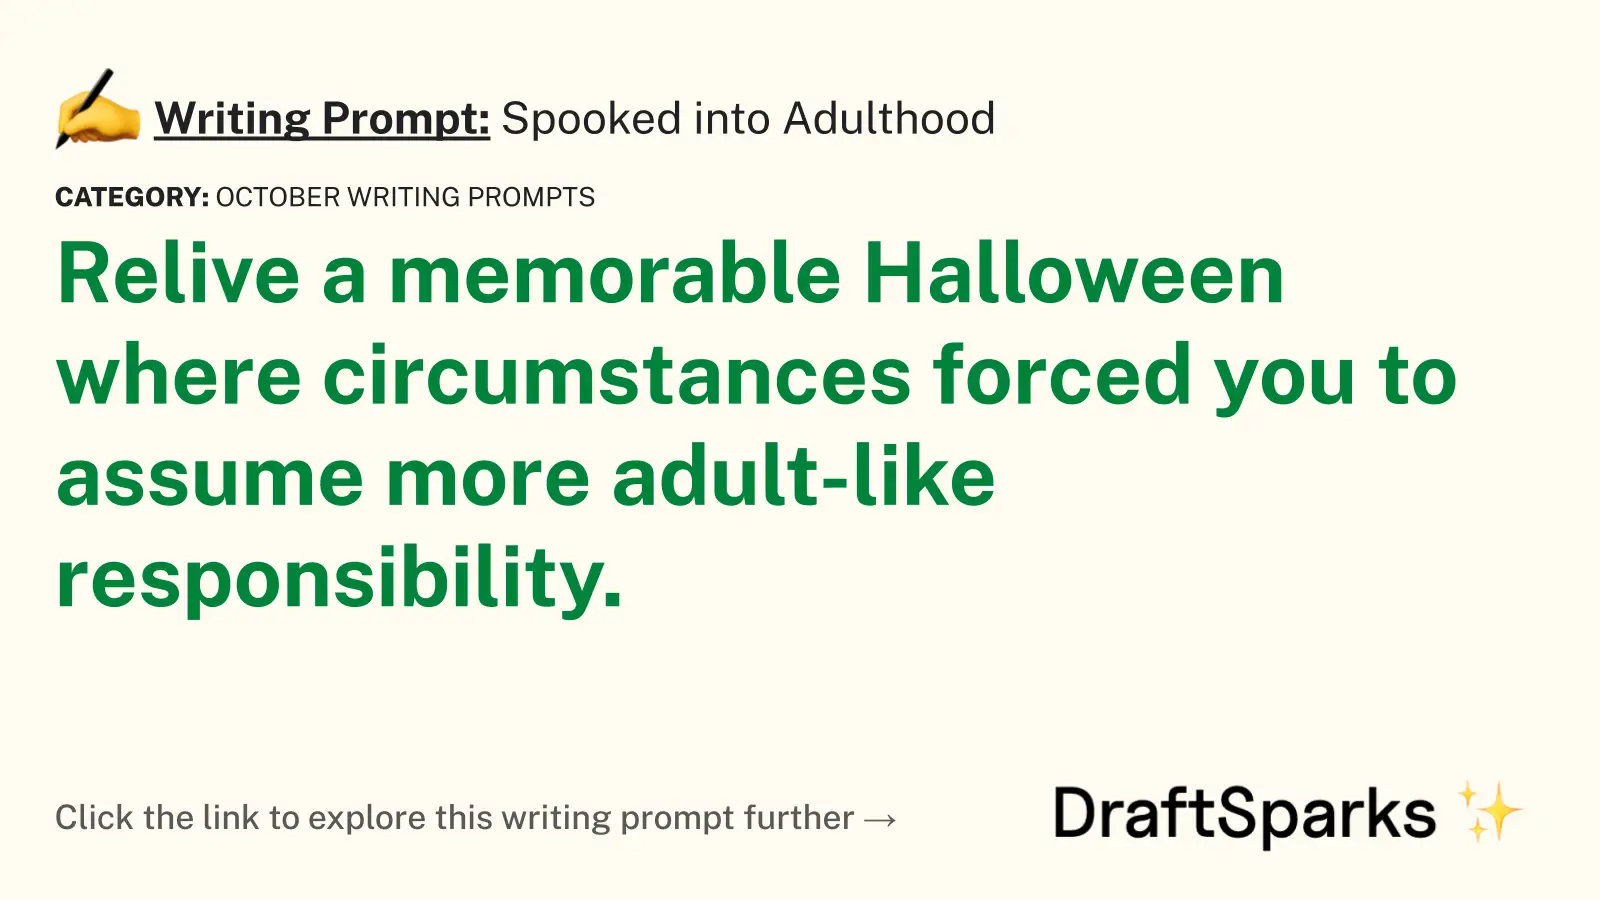 Spooked into Adulthood